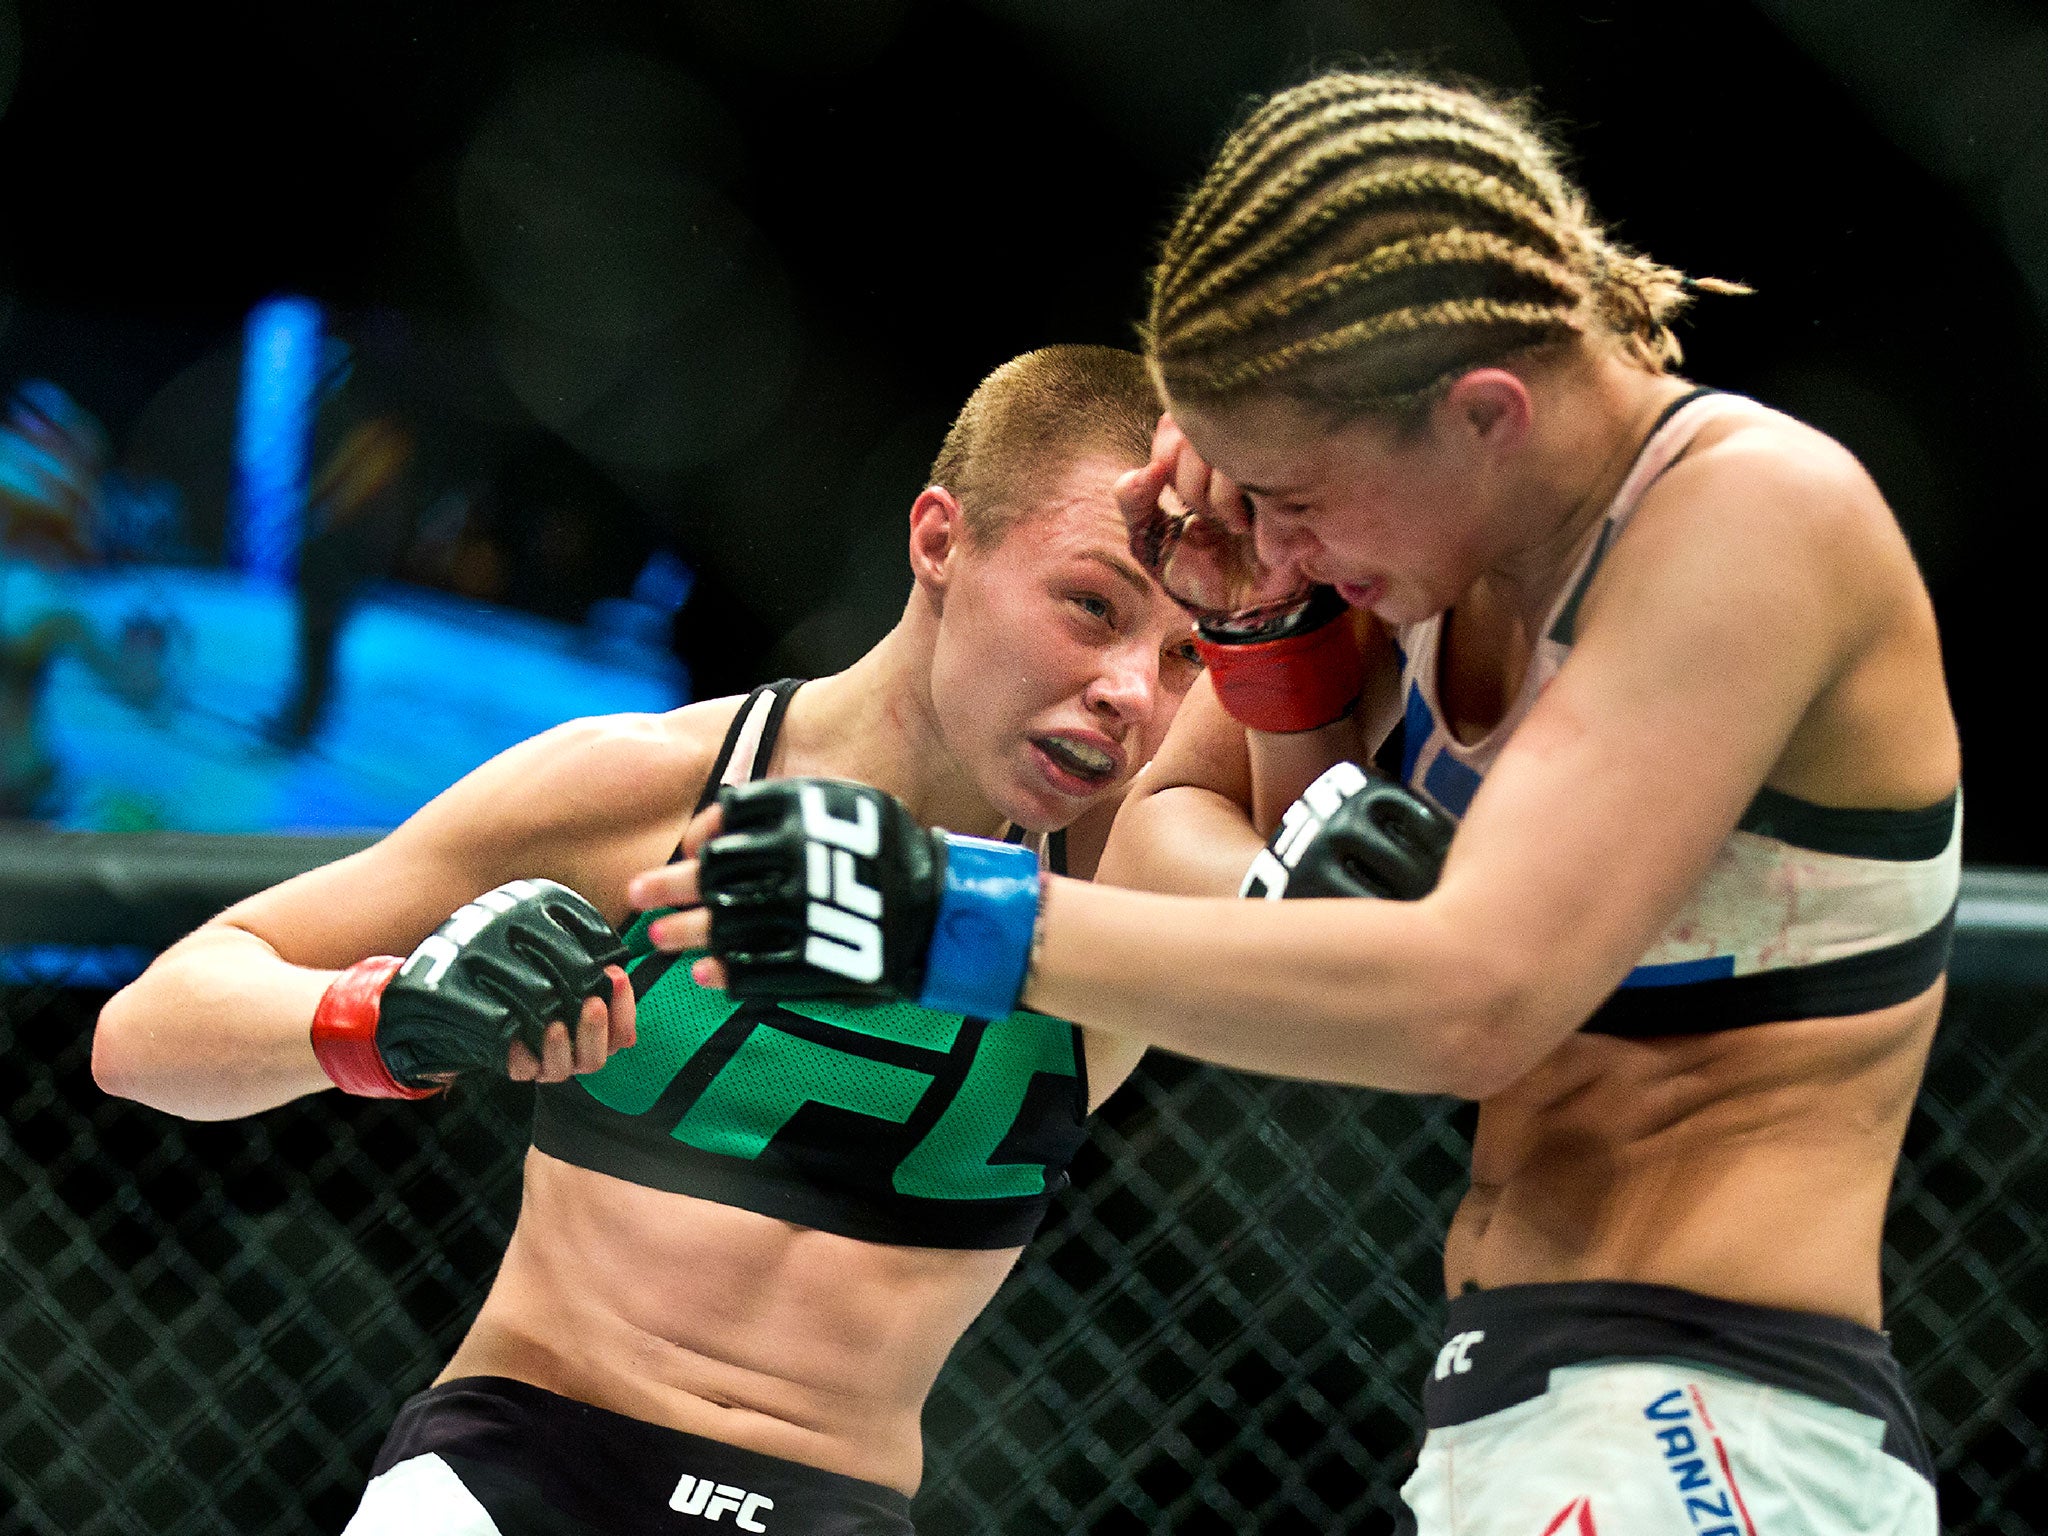 Rose Namajunas defeated Paige VanZant by submission